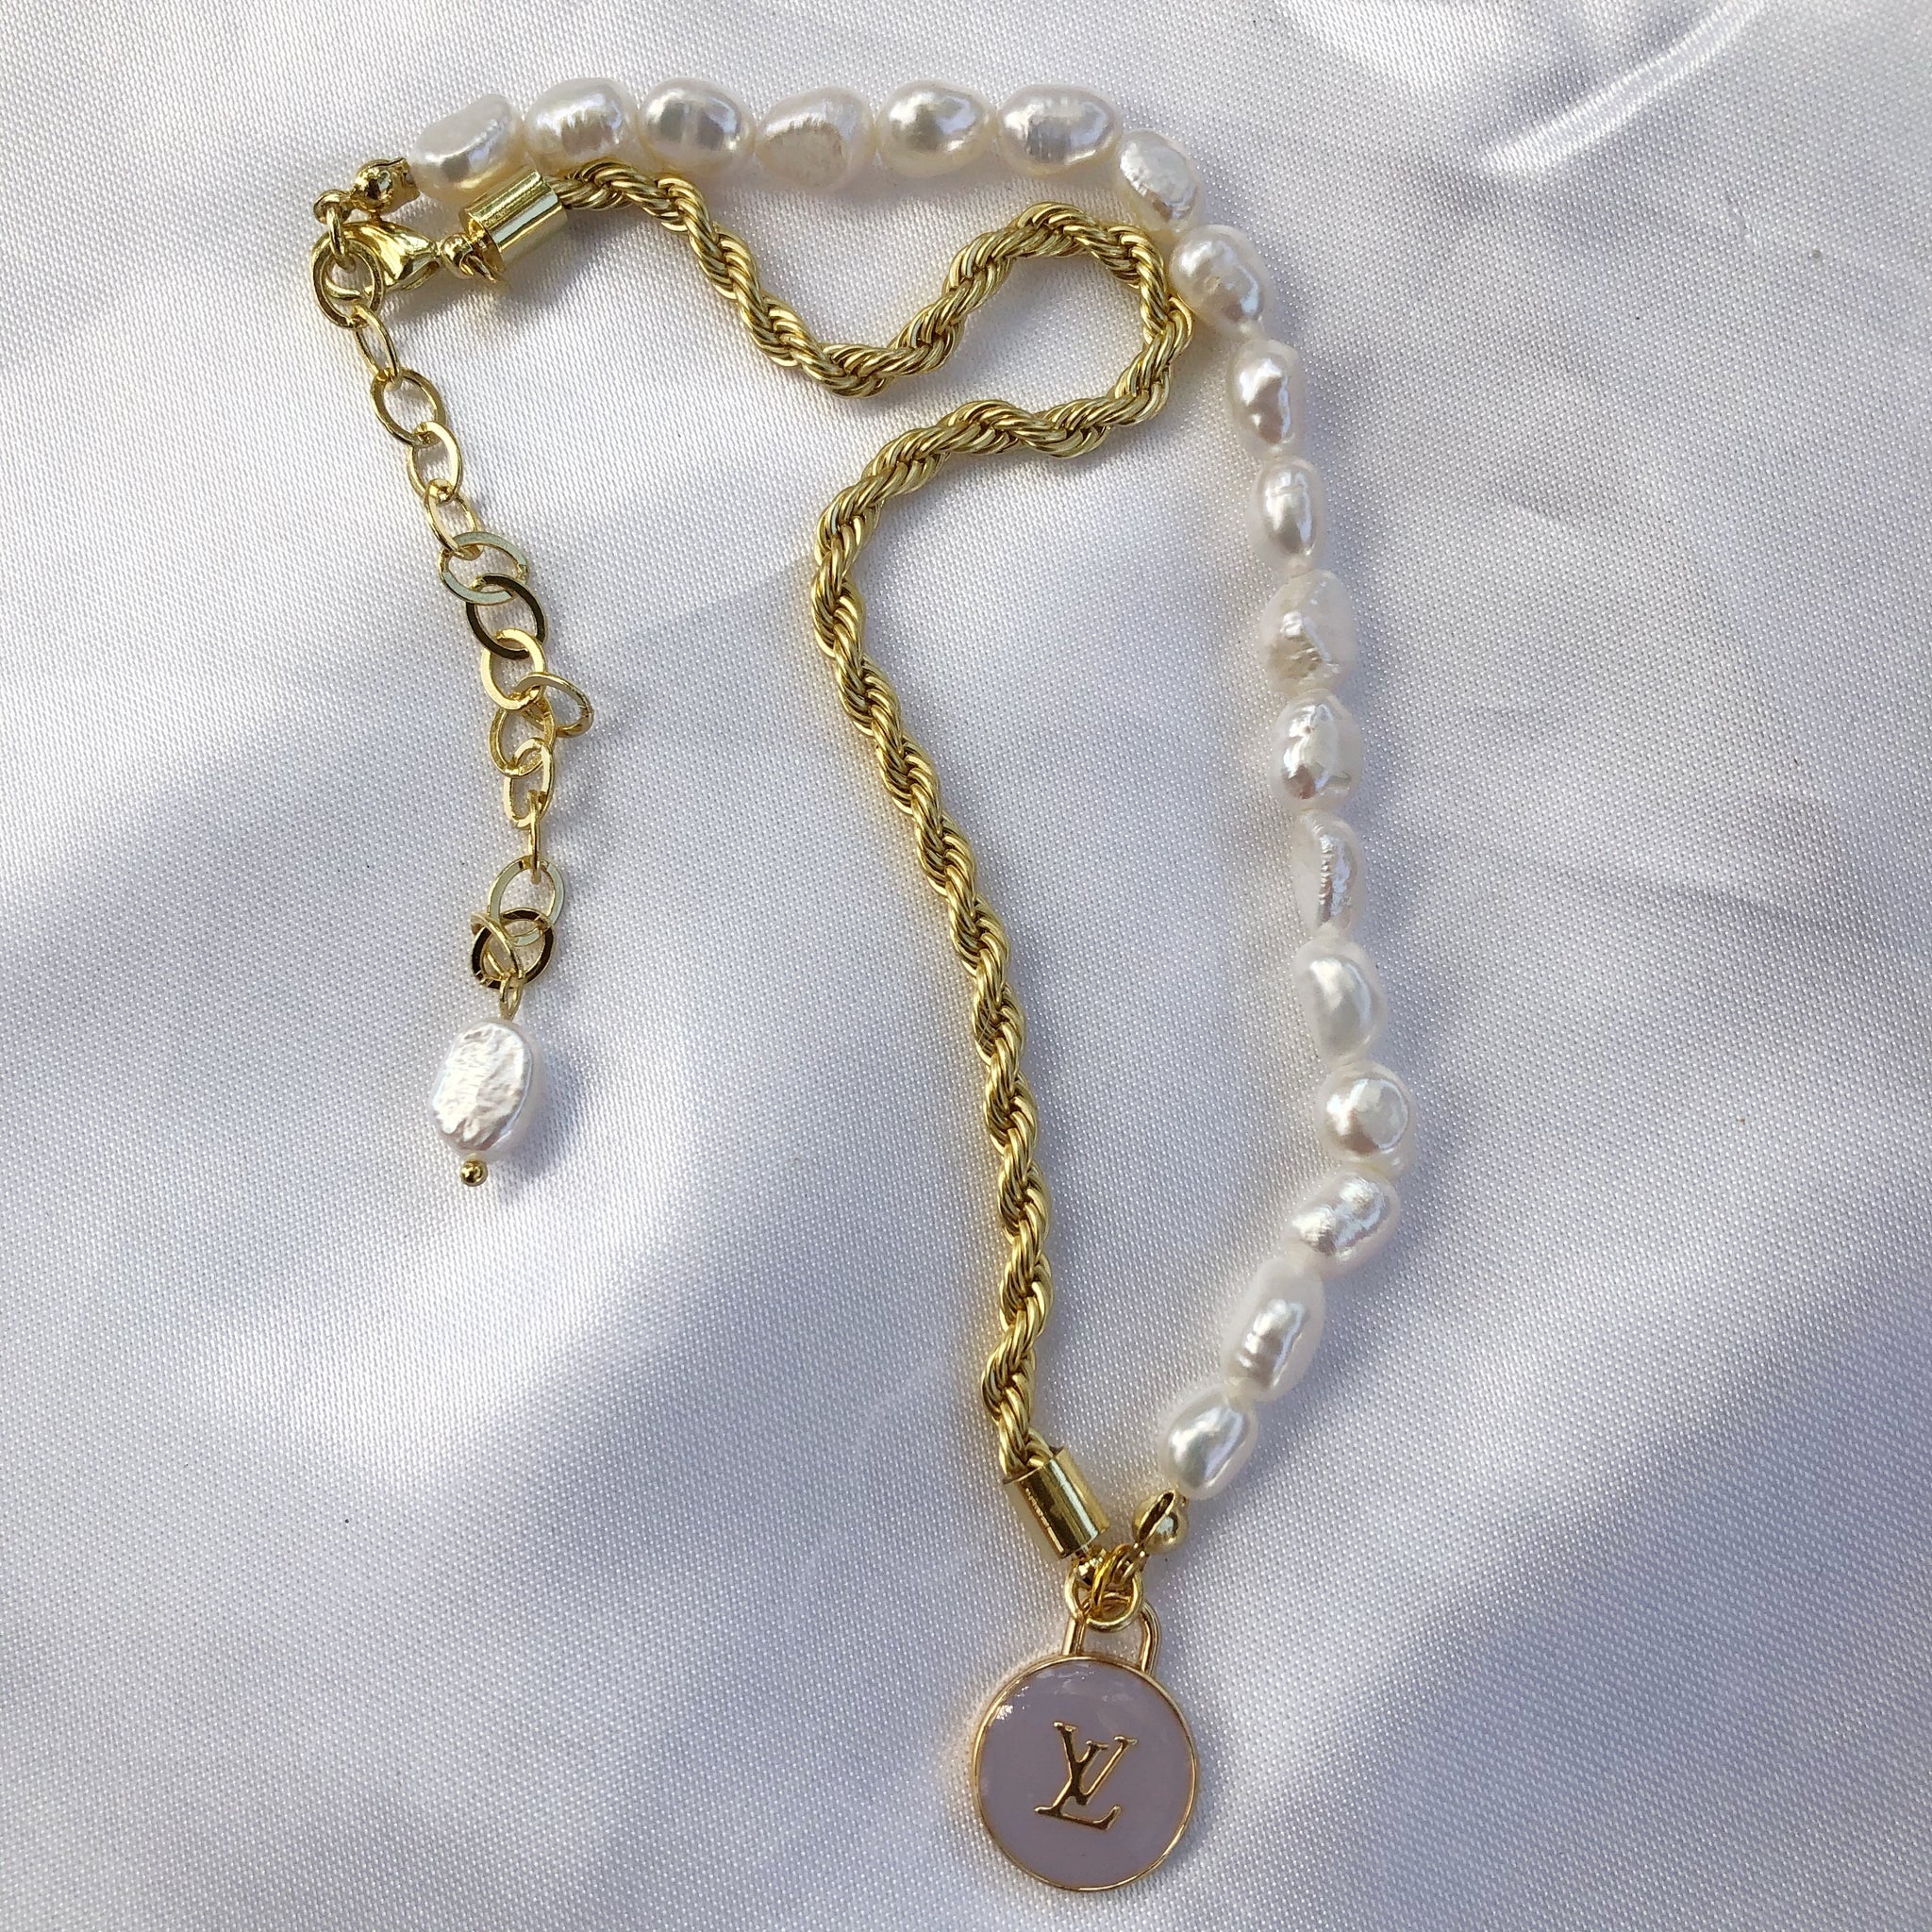 Designer Fresh Water Pearl Necklace with Authentic Louis Vuitton